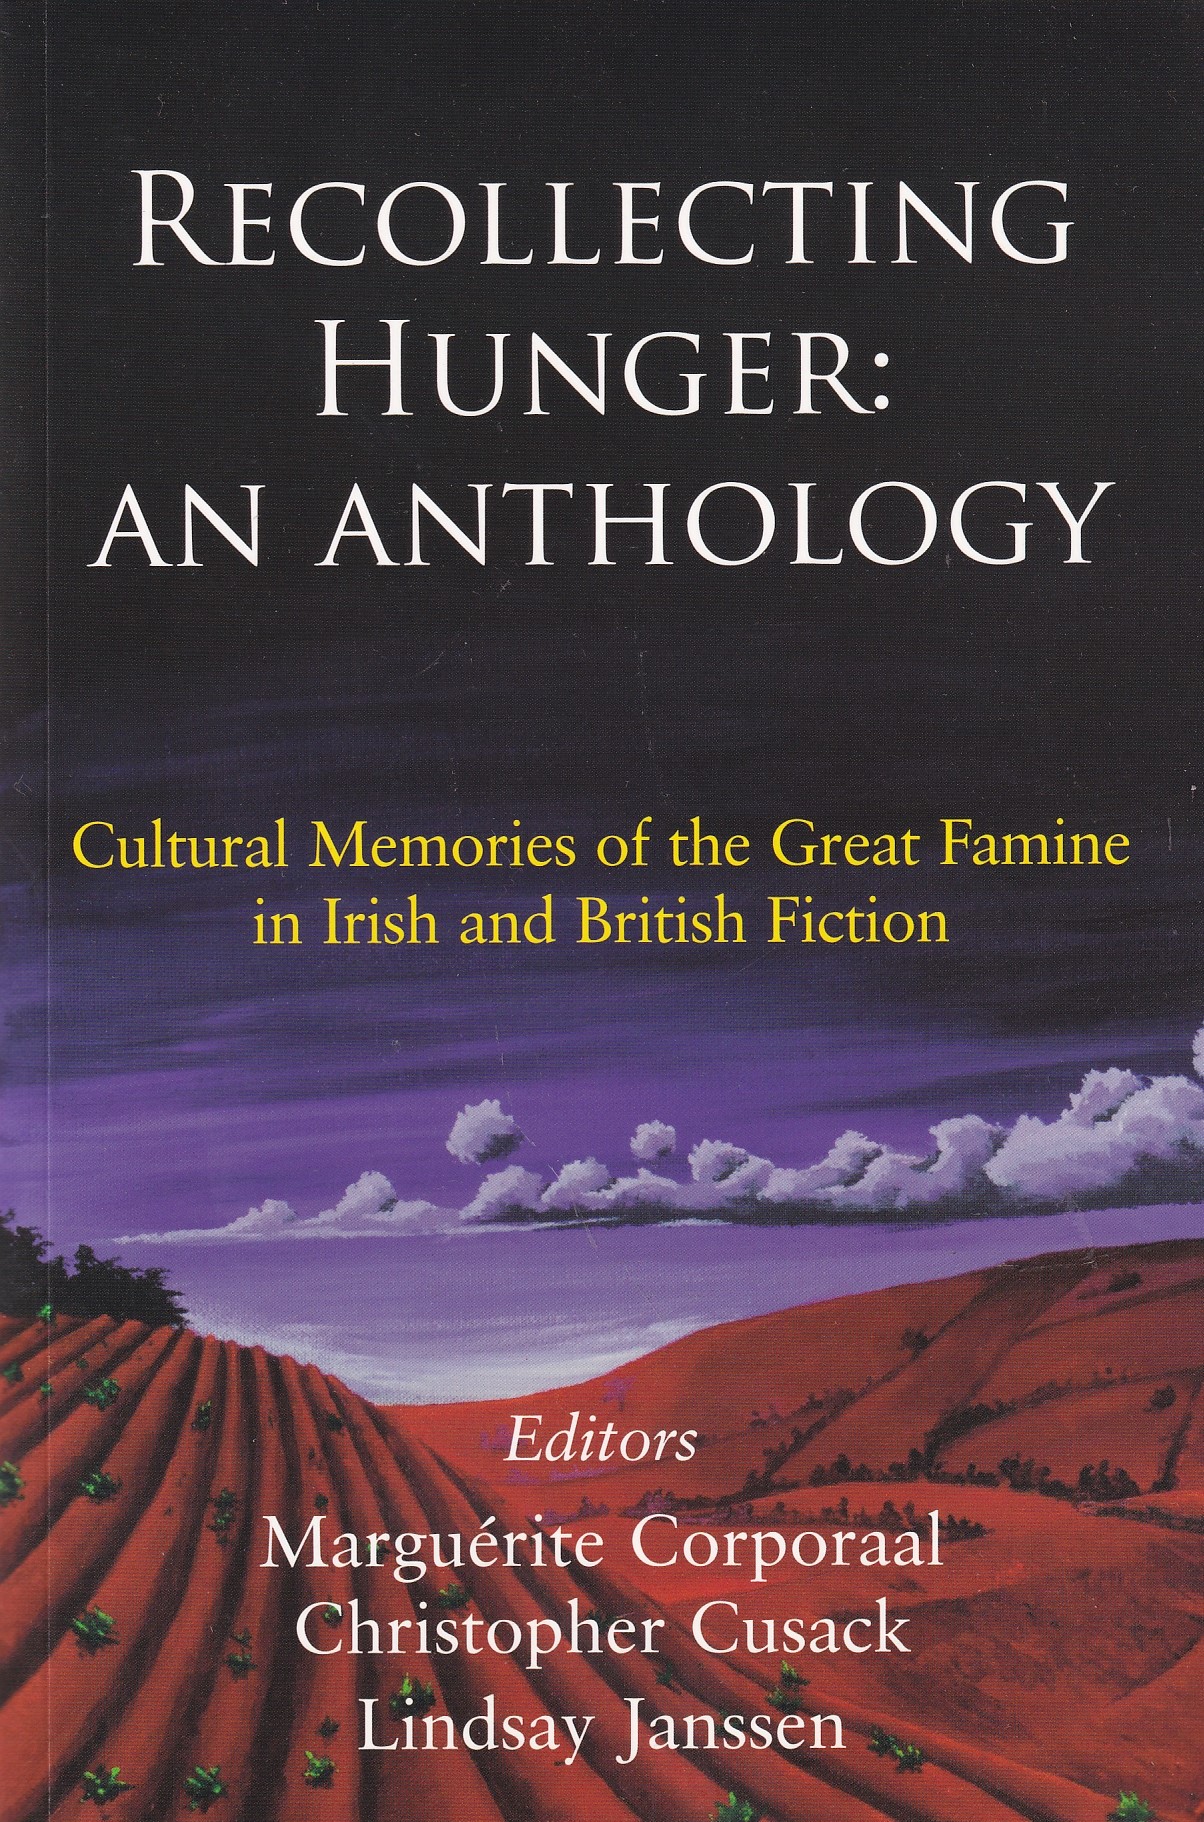 Recollecting Hunger: An Anthology | Marguérite Corporaal, Christopher Cusack, Linsday Janssen | Charlie Byrne's